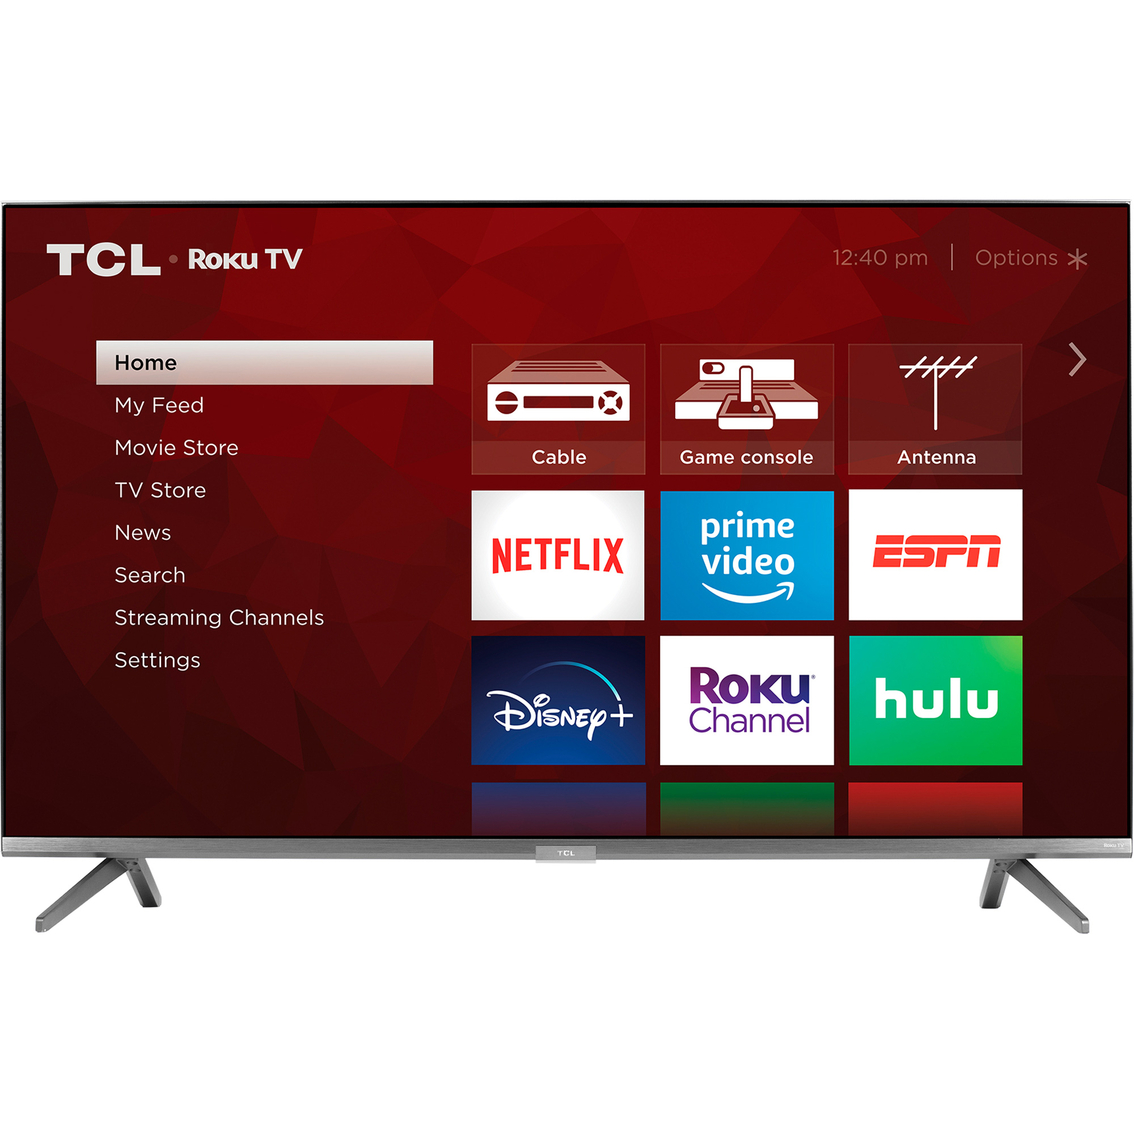 TCL 65 in. Series 6 mini-QLED 4K UHD Dolby Vision Roku Smart TV 65R635 - Image 2 of 10